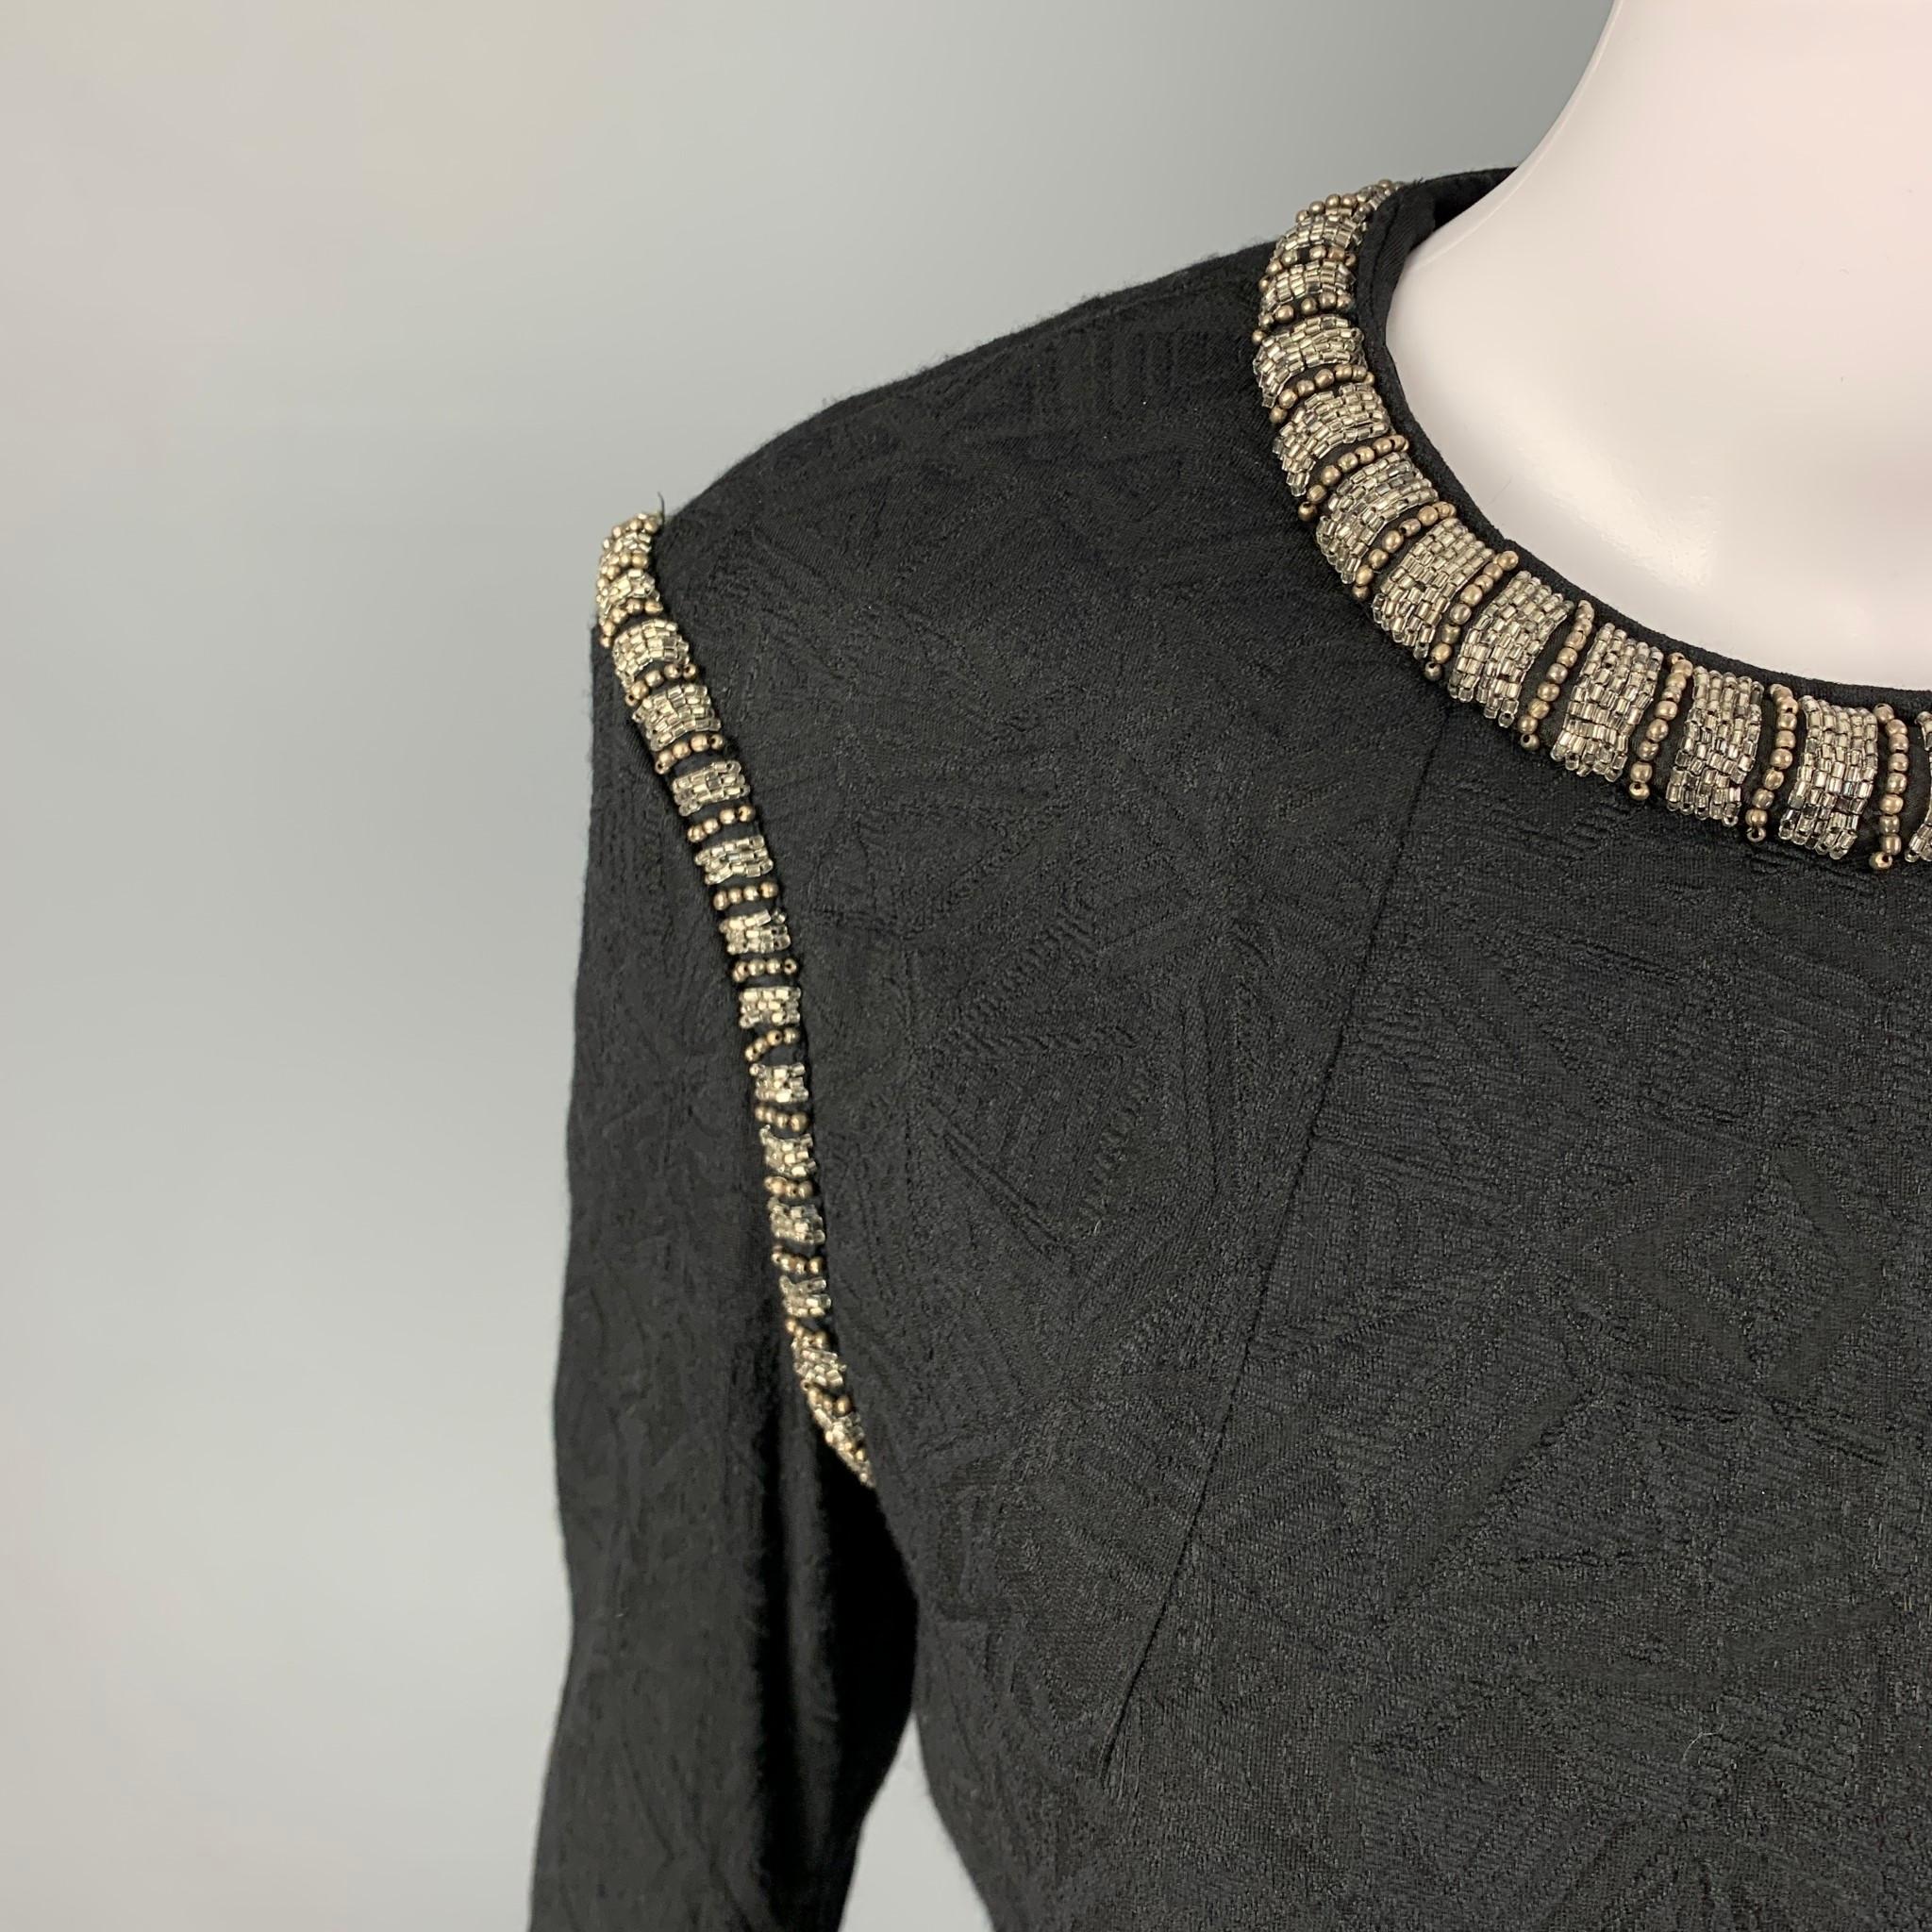 DRIES VAN NOTEN dress top comes in a black jacquard wool blend featuring a beaded trim, crew-neck, and a back zip up closure. 

Excellent Pre-Owned Condition.
Marked: 38

Measurements:

Shoulder: 16.5 in.
Bust: 34 in.
Sleeve: 22.5 in.
Length: 21.5